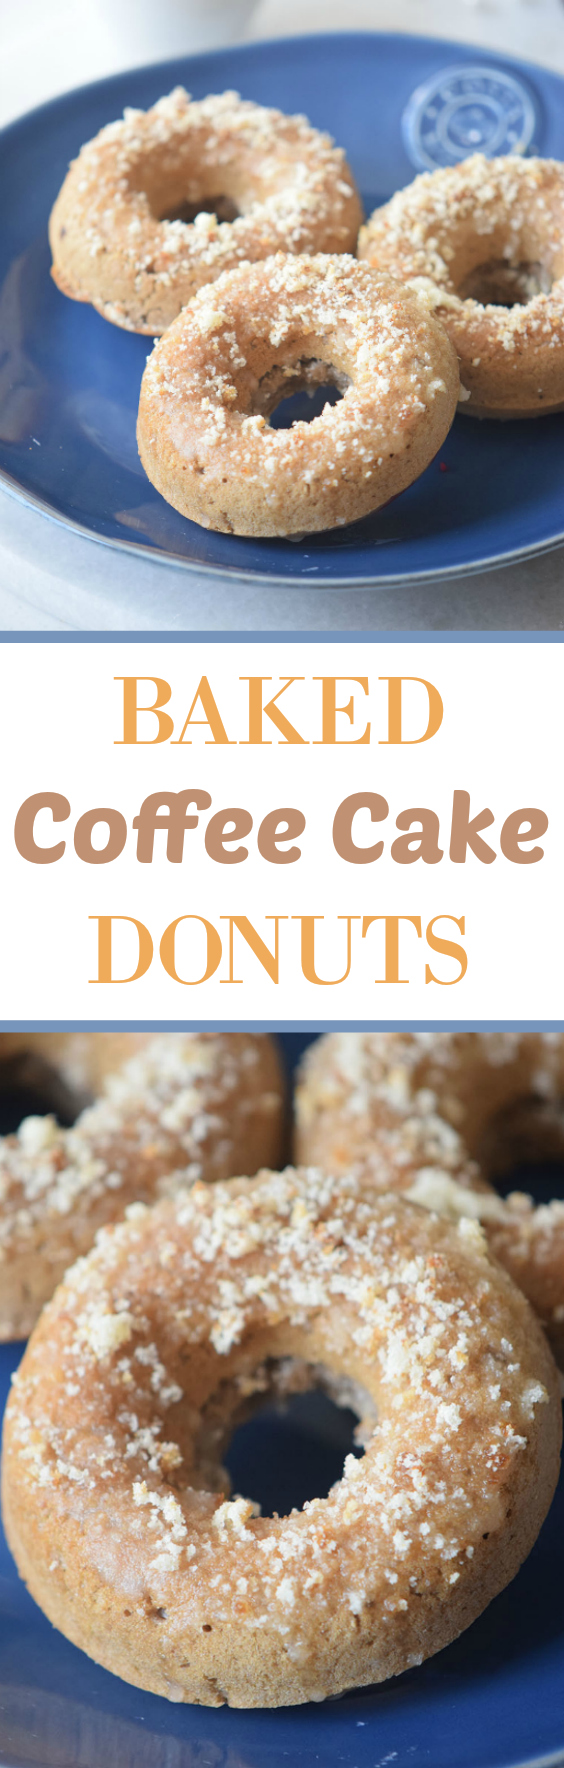 Baked Coffee Cake Donuts with crumb toppings ready in record time